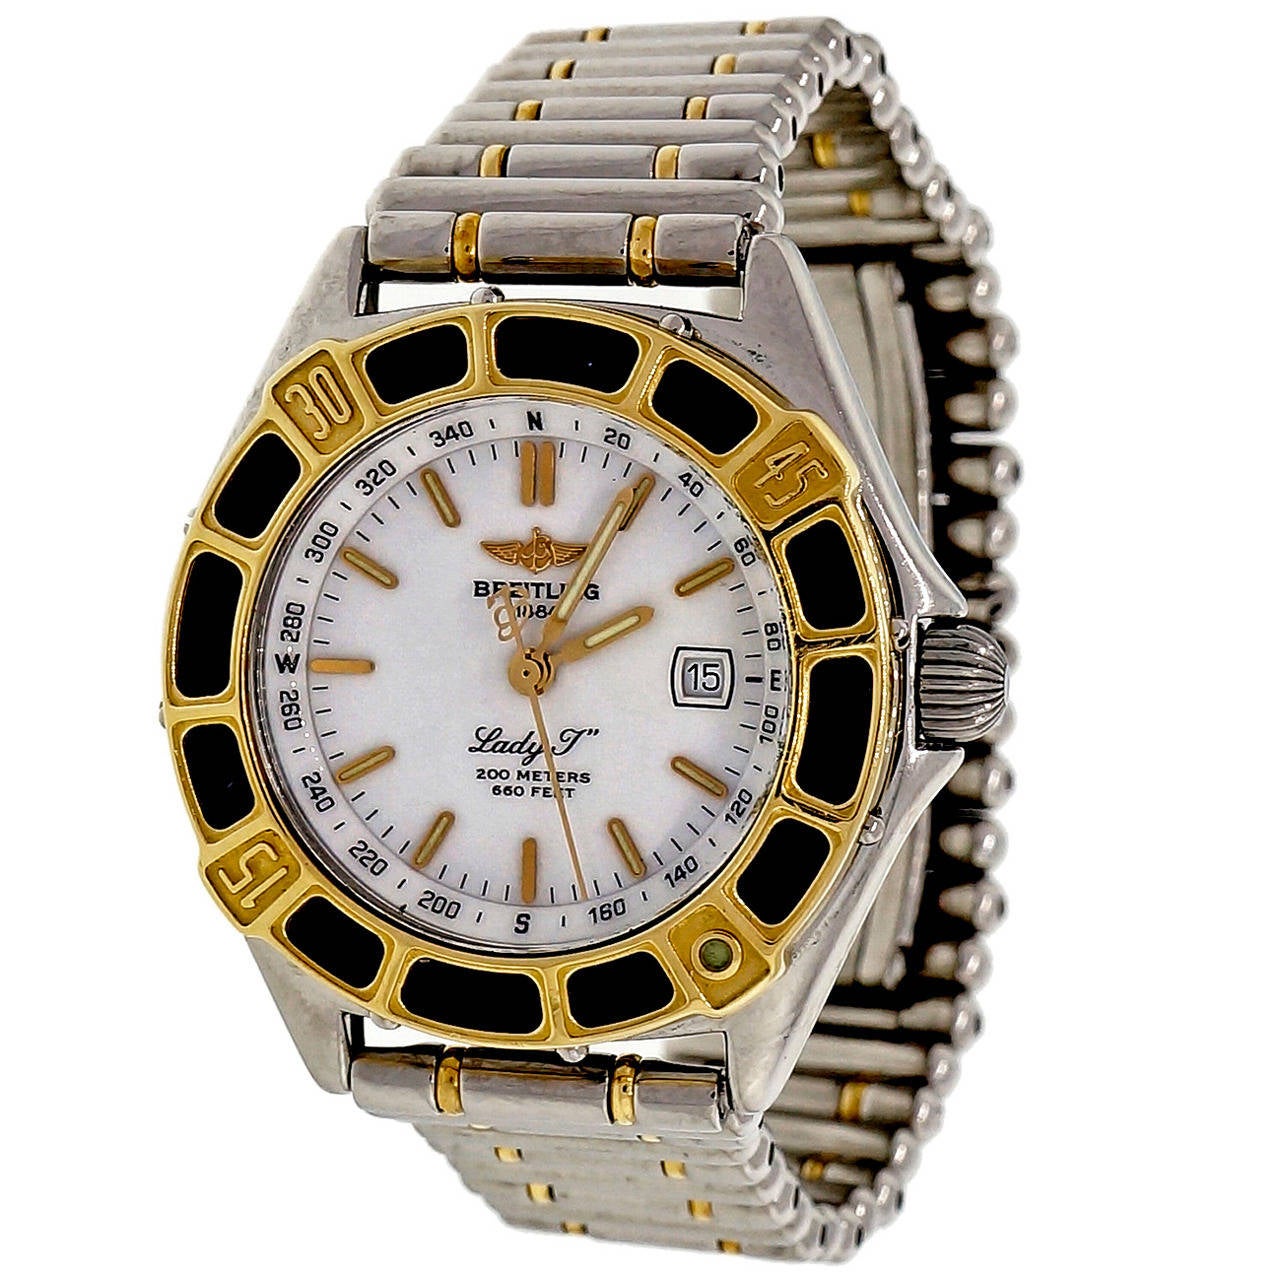 Breitling Lady''s Yellow Gold Stainless Steel Lady J Wristwatch Ref D52065  at 1stDibs | breitling lady j, breitling lady j watch, breitling d52065